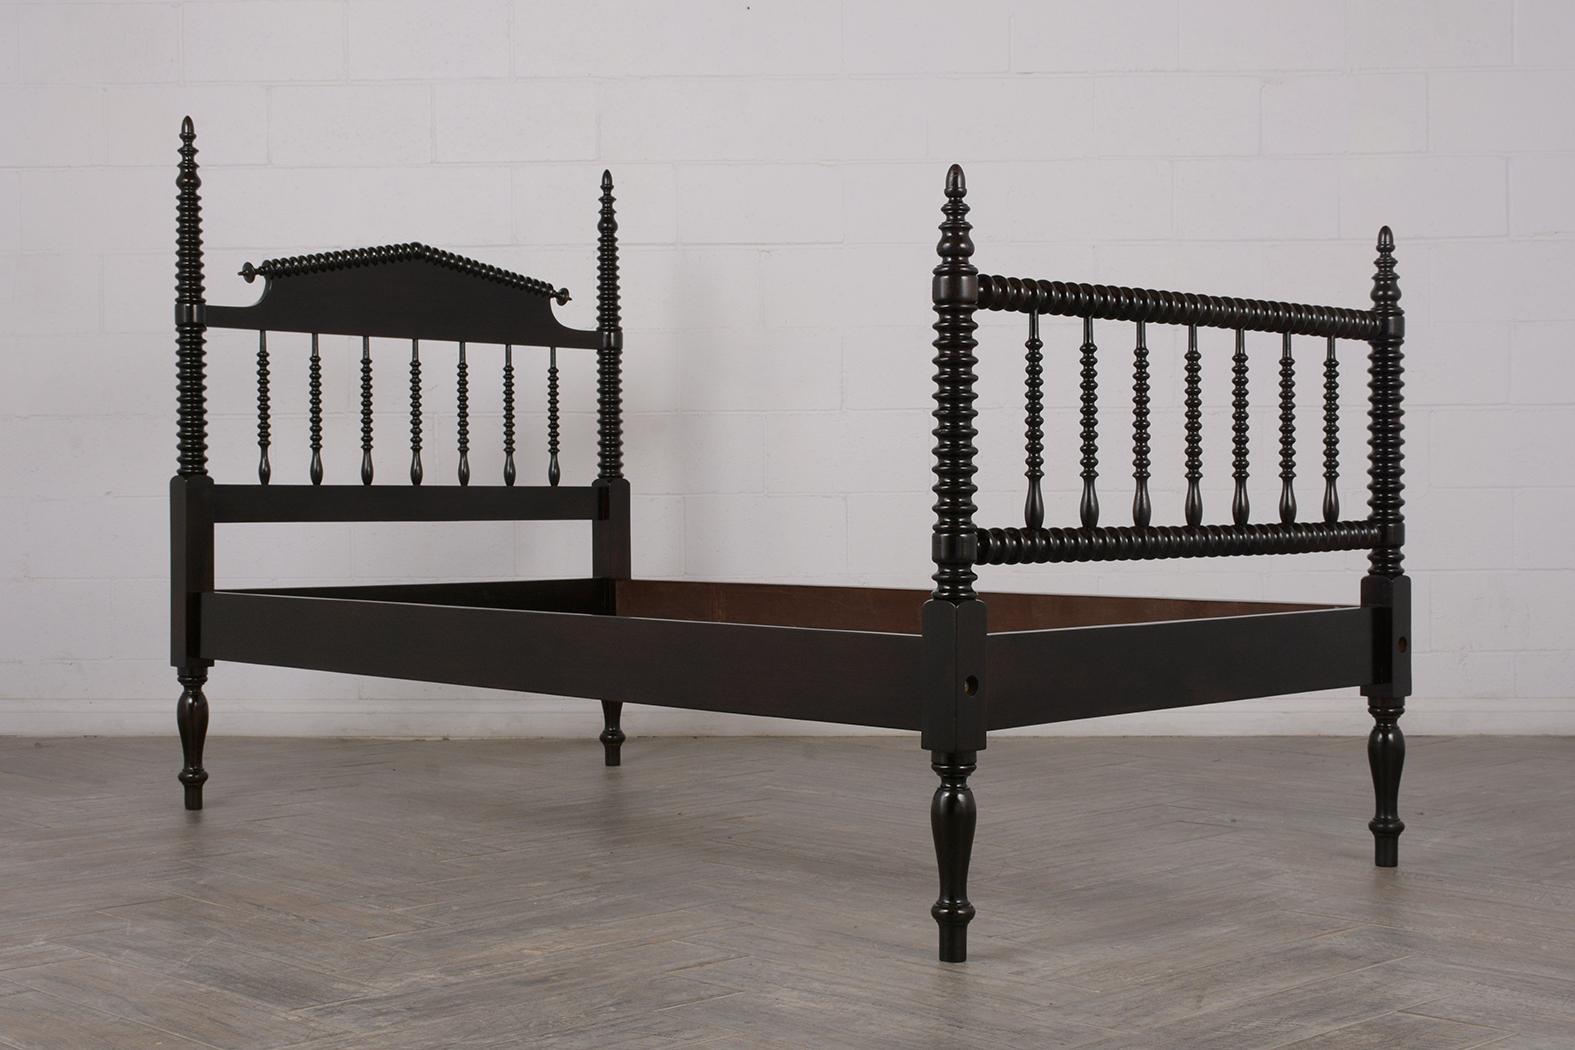 European Pair of Twin Size Beds Regency Style with Ebonized Finish, circa 1900s